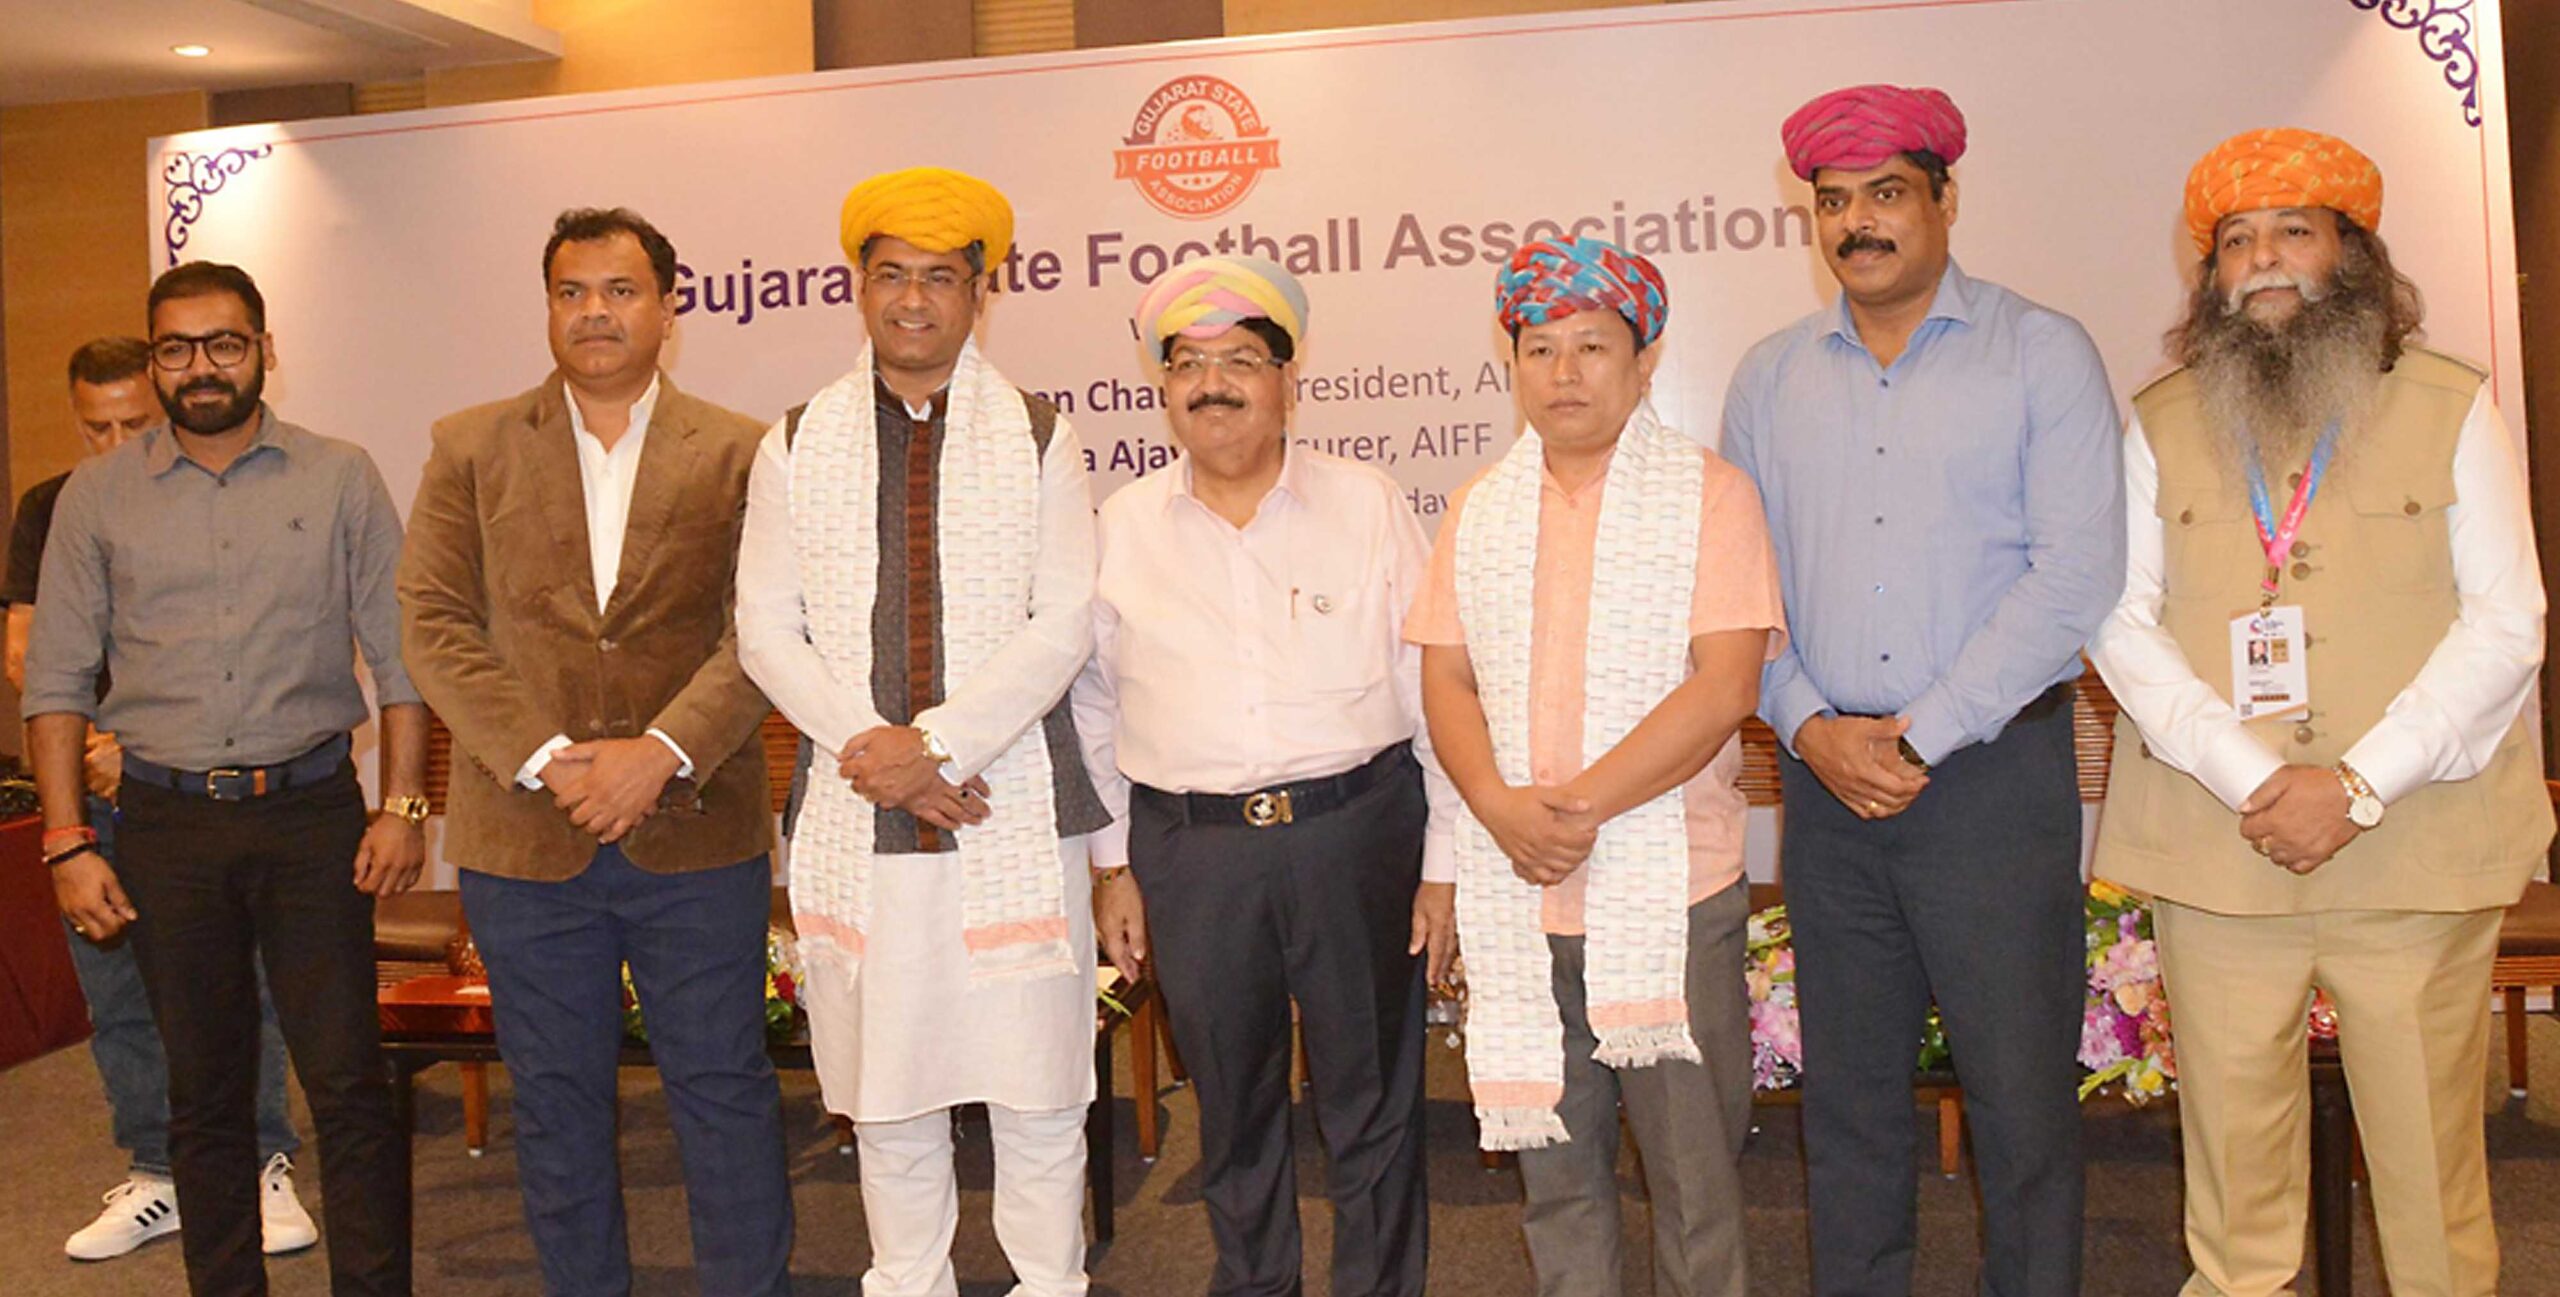 AIFF will reach out to 18 lakh students to prepare talent for the future of football